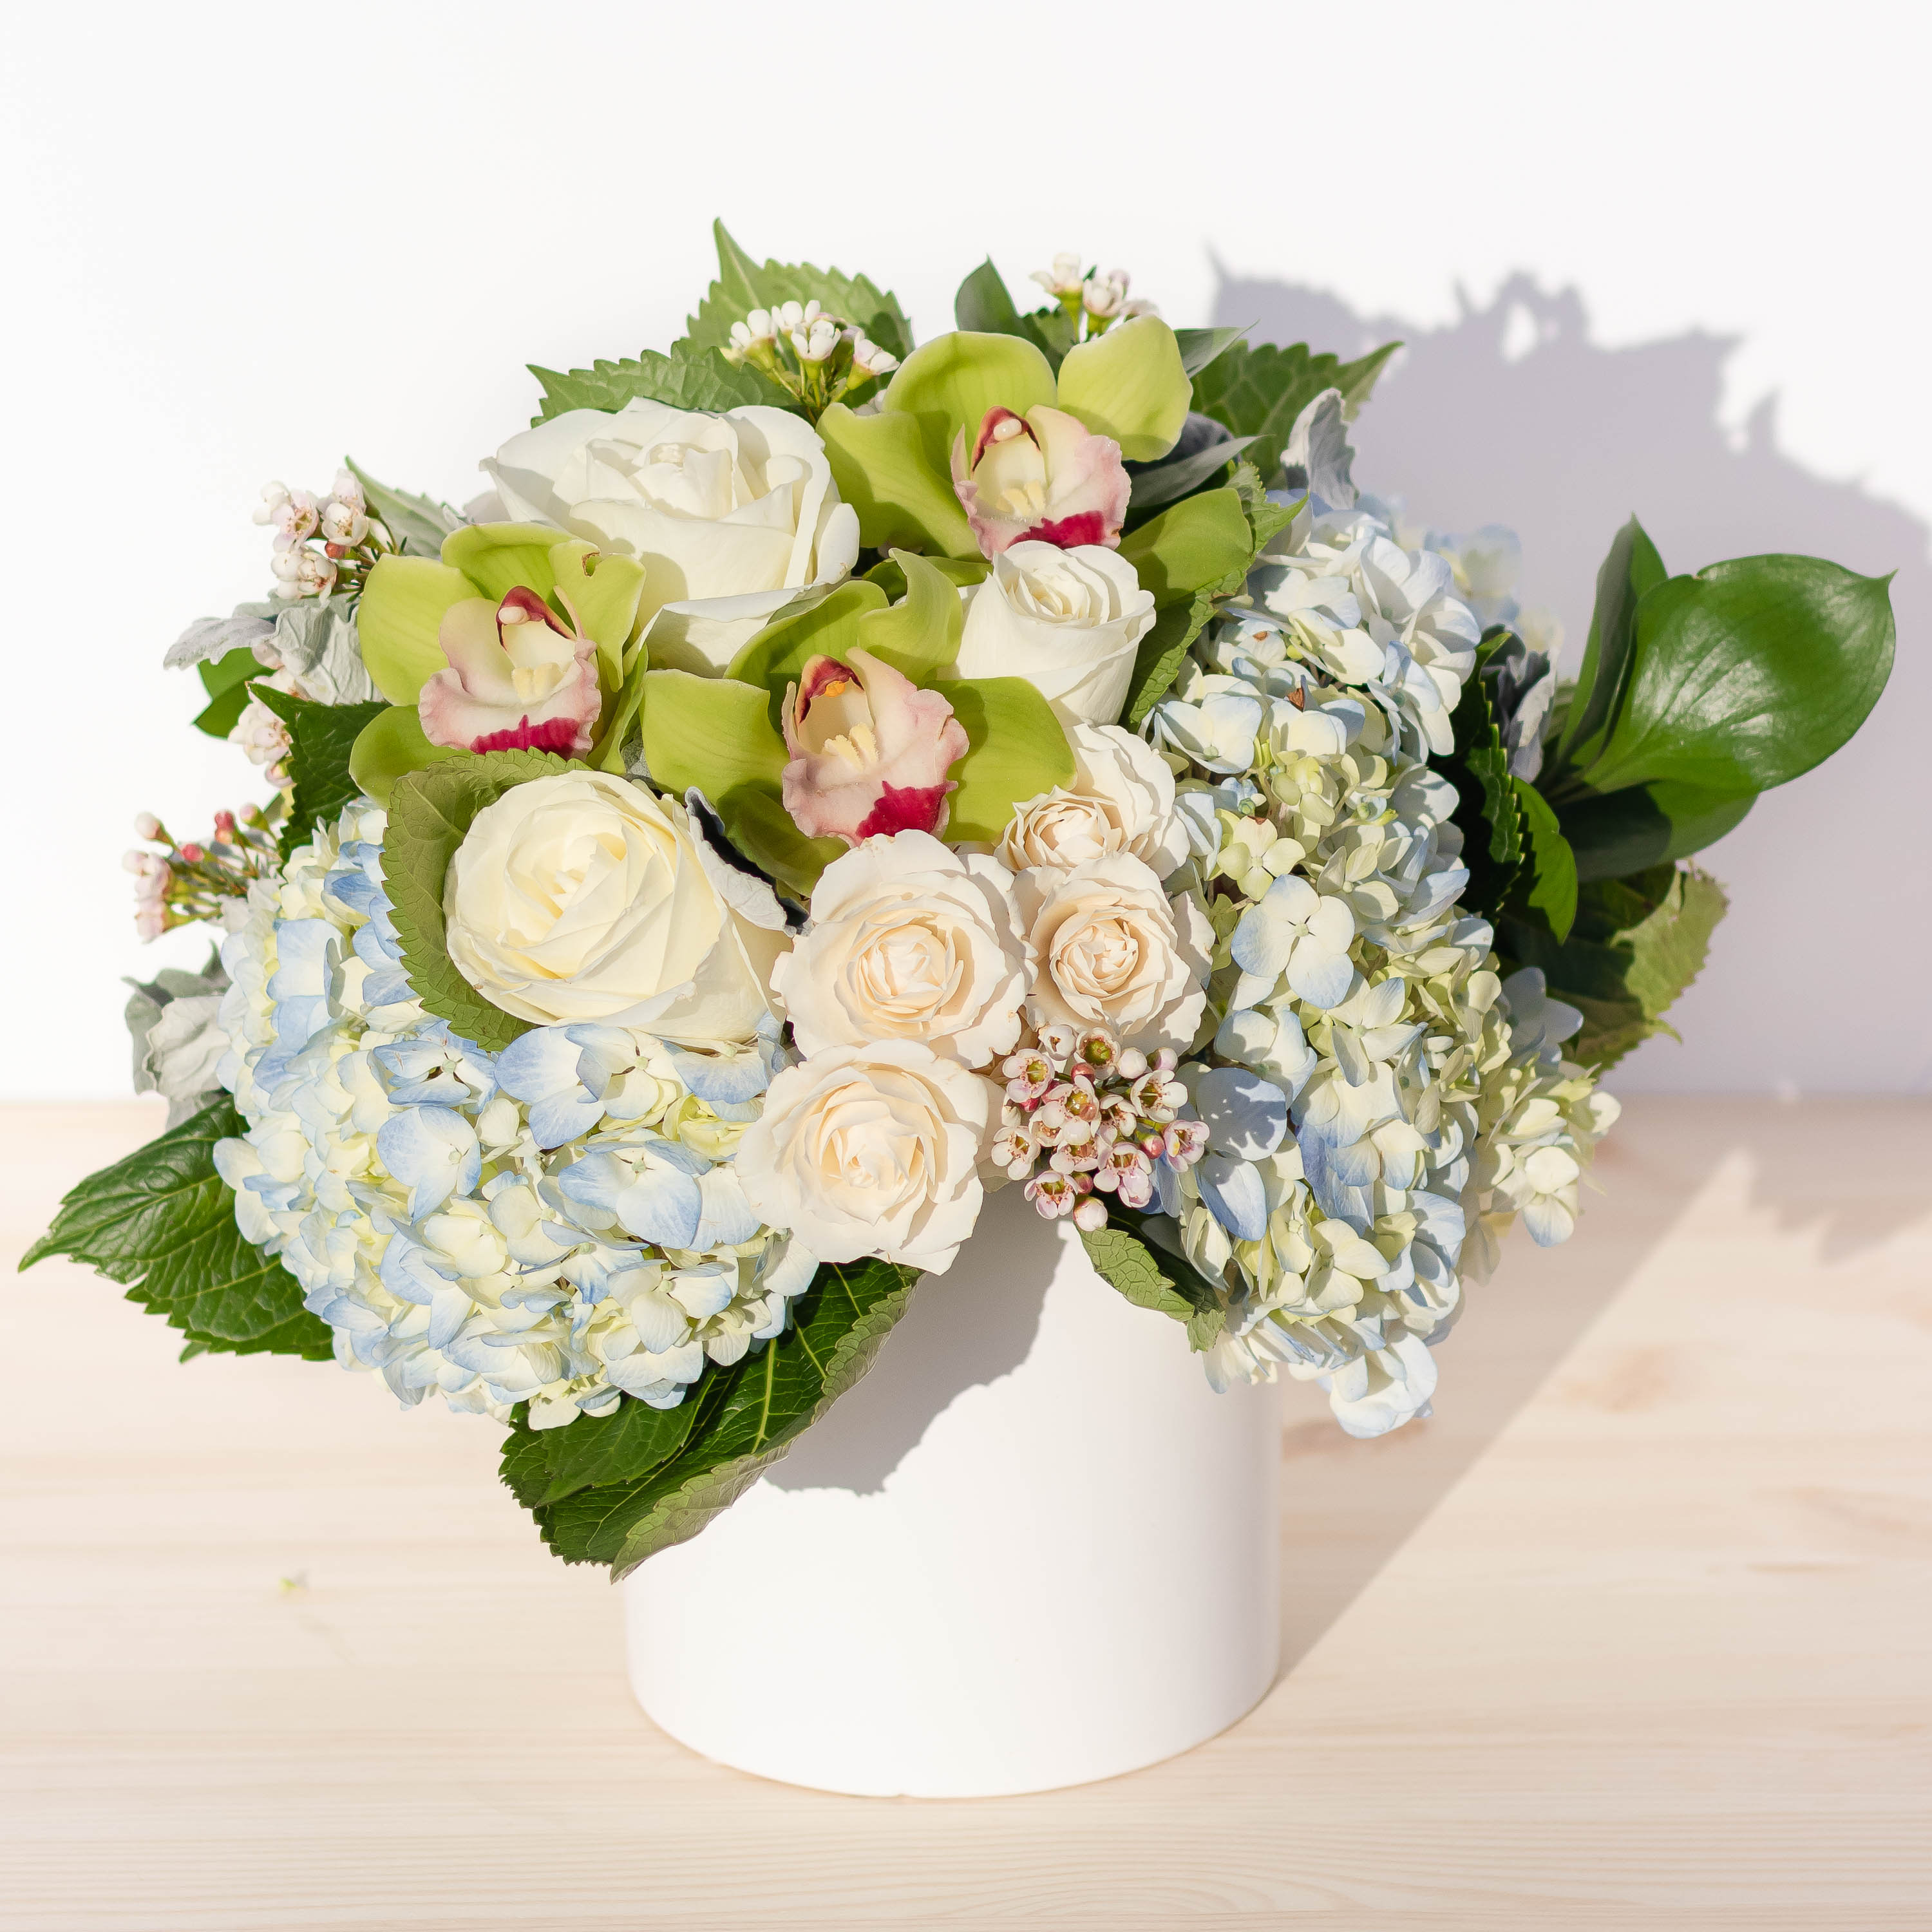 CLEAR SKIES  - Beautiful display of ivory and blue hydrangeas. Cymbidium orchids compliment this design. Set in a modern white ceramic vase.   Orientation: All-around Size: Medium  Please note: We use flowers that are available at that given time. The look and the freshness of the flowers are always the most important, therefore the arrangement may vary. We may notify you be email for any substitutions may be made based on best product available.